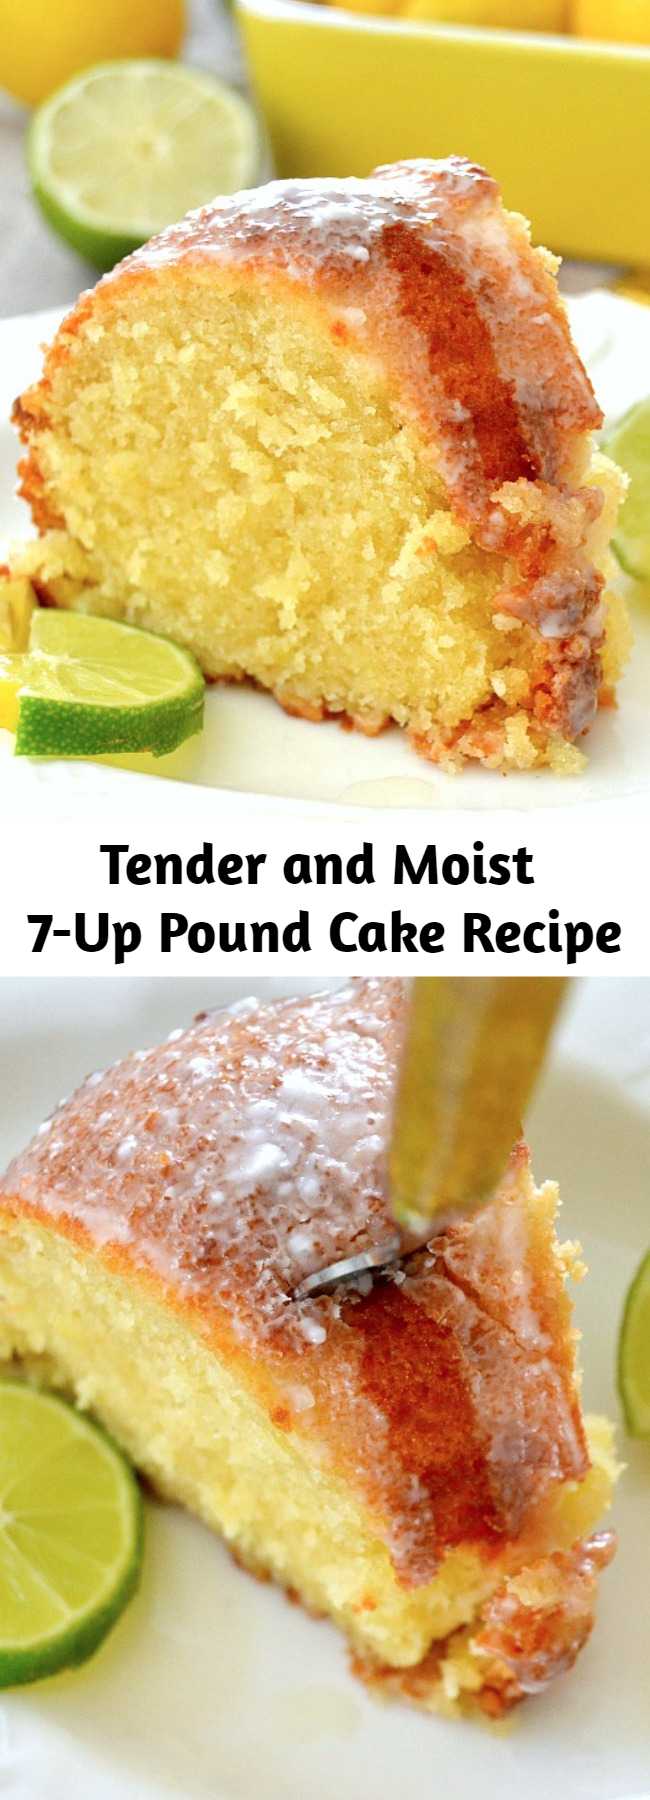 Tender and Moist 7-Up Pound Cake Recipe - This cake is AMAZING... The flavor is so out of control awesome and the cake itself is dense, tender and moist. It’s buttery, sweet, and citrusy thanks to the zip from lemons and limes.